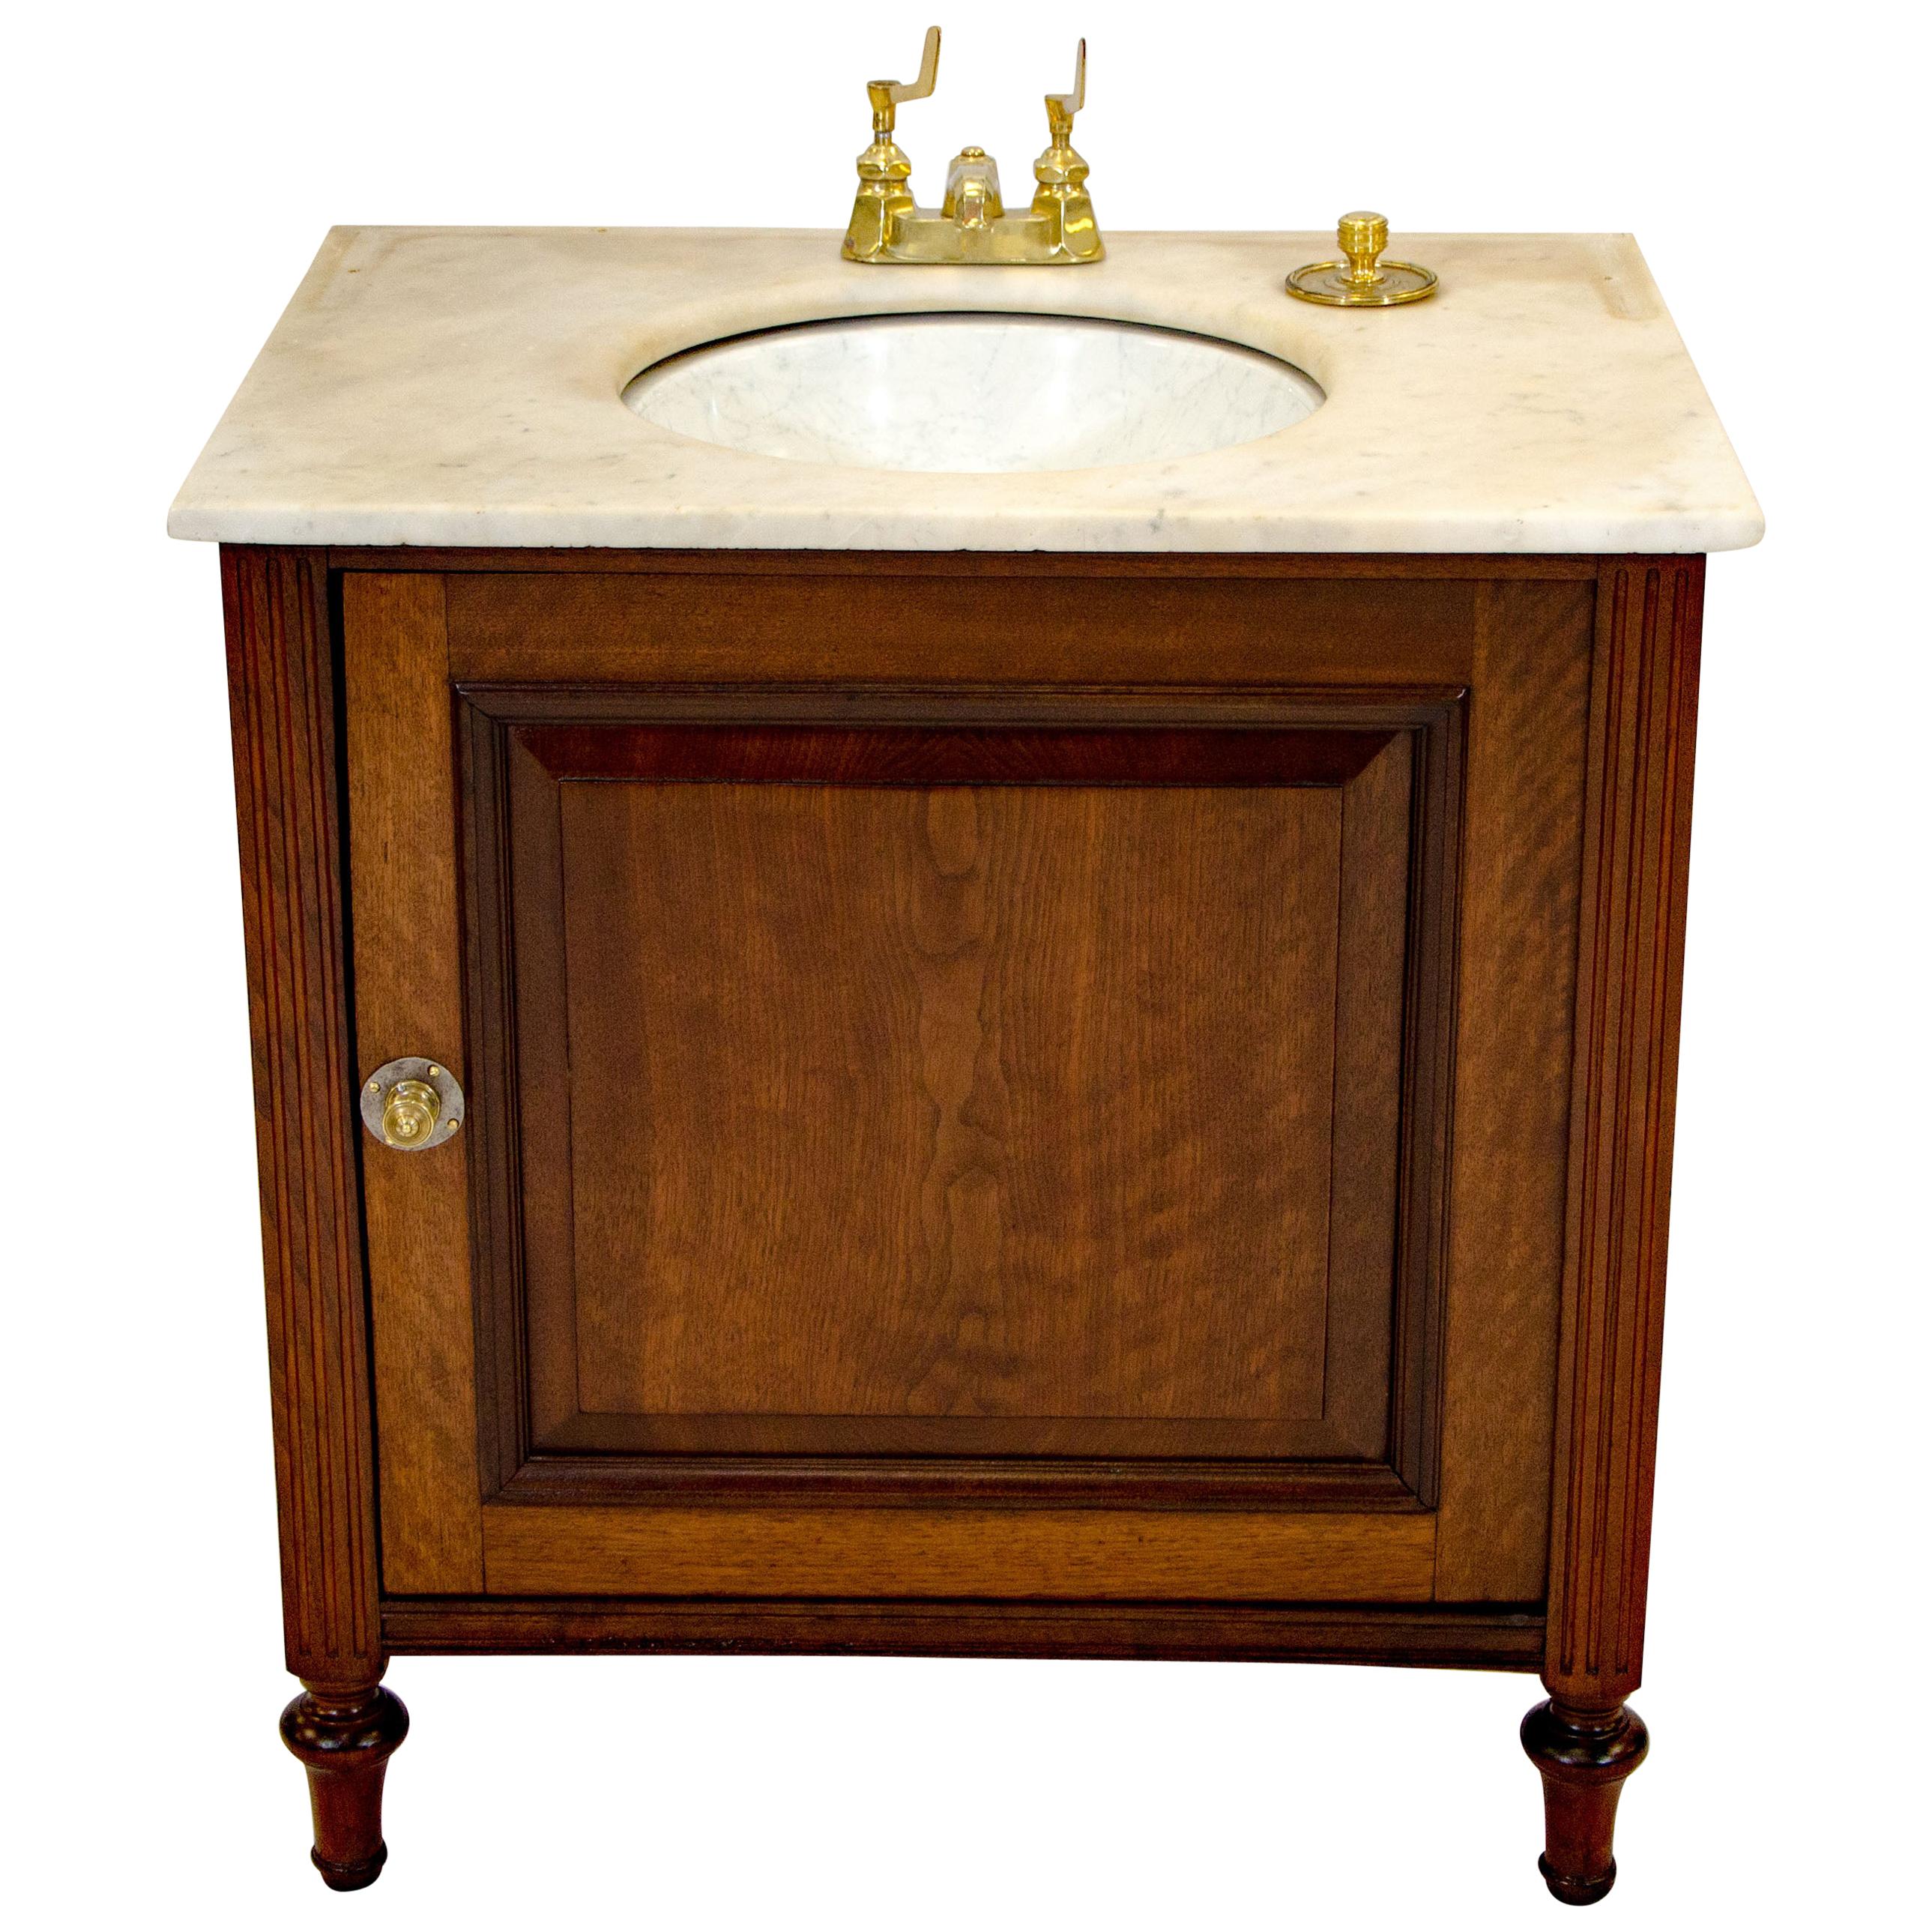 Victorian Marble-Top Cabinet with Sink